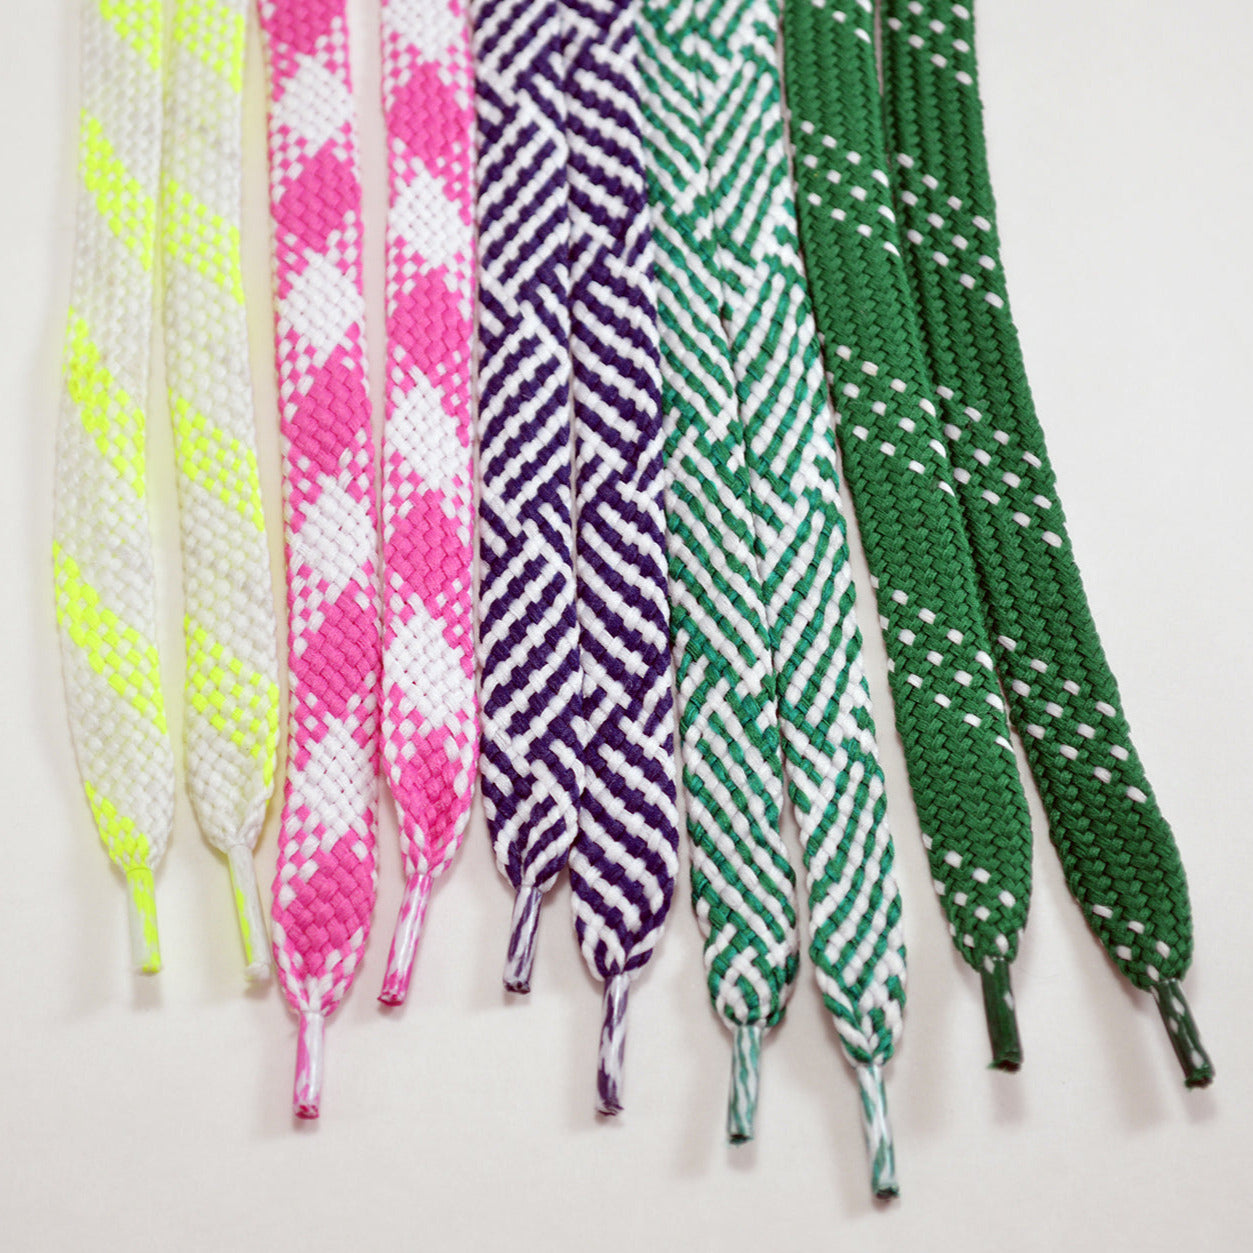 Preppy Plaid Golf Shoe Laces Pink and White